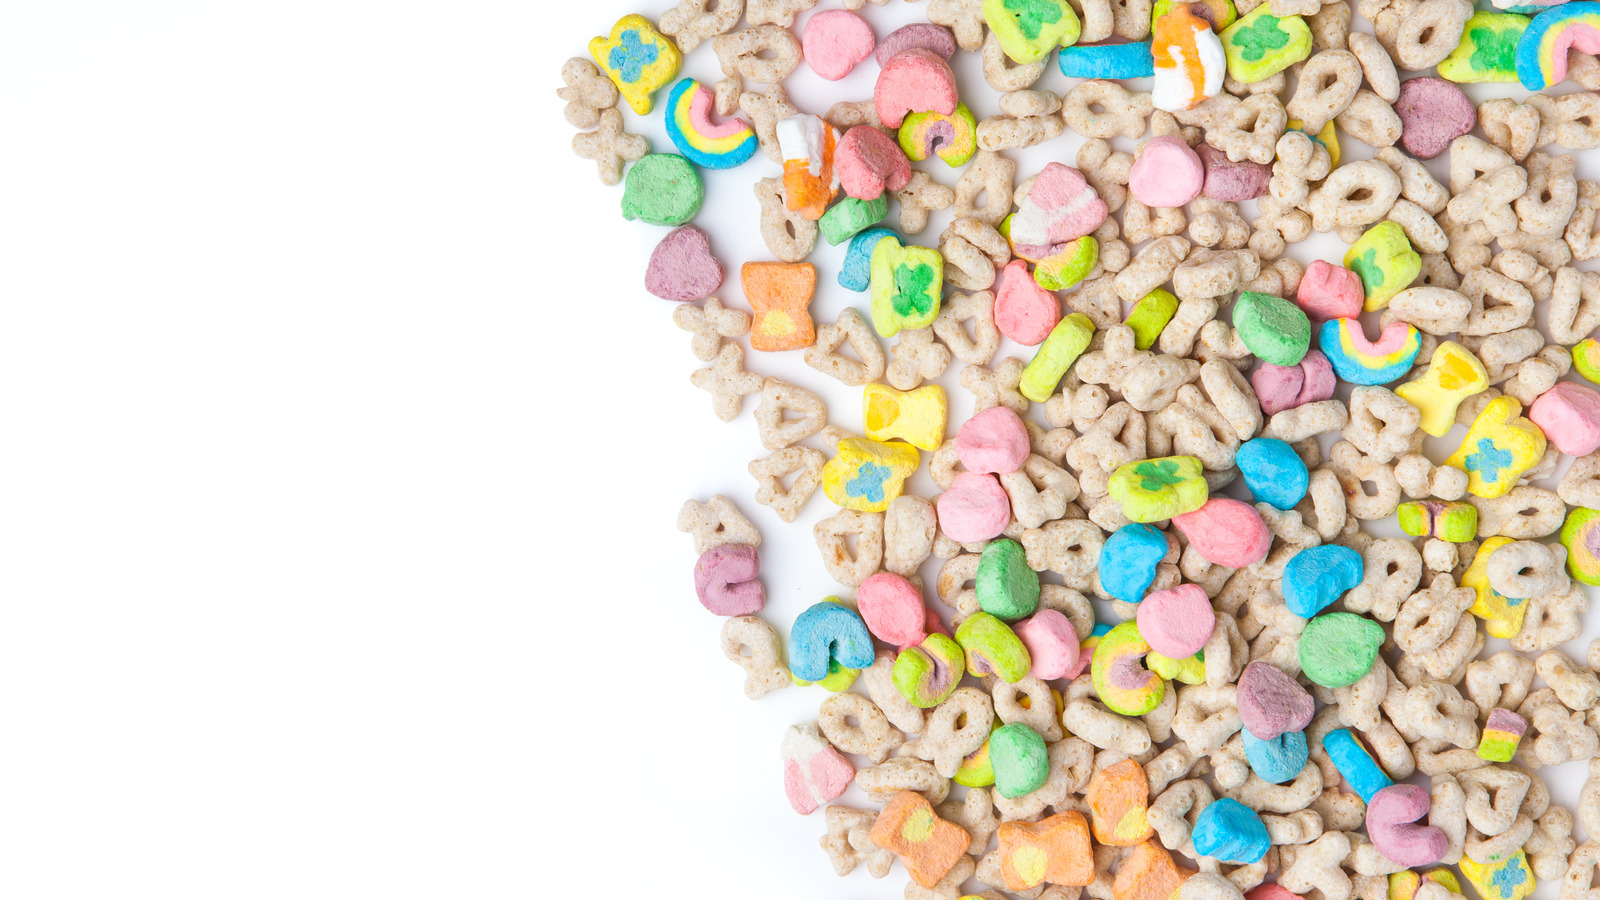 This Is What Lucky Charms Marshmallows Are Really Called